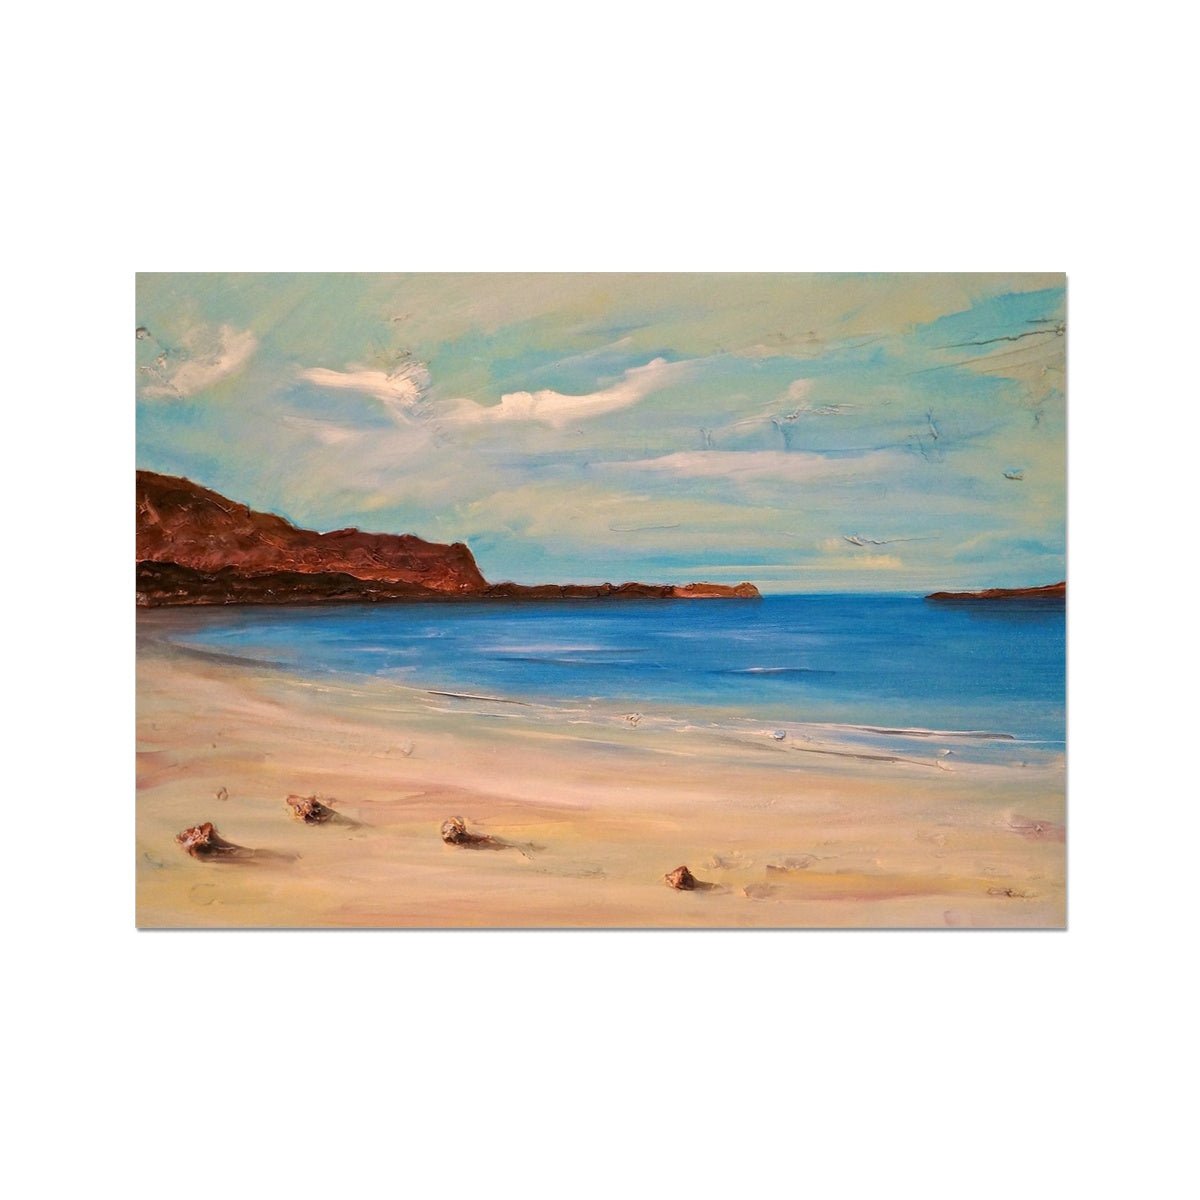 Bosta Beach Lewis Painting | Fine Art Prints From Scotland-Unframed Prints-Hebridean Islands Art Gallery-A2 Landscape-Paintings, Prints, Homeware, Art Gifts From Scotland By Scottish Artist Kevin Hunter